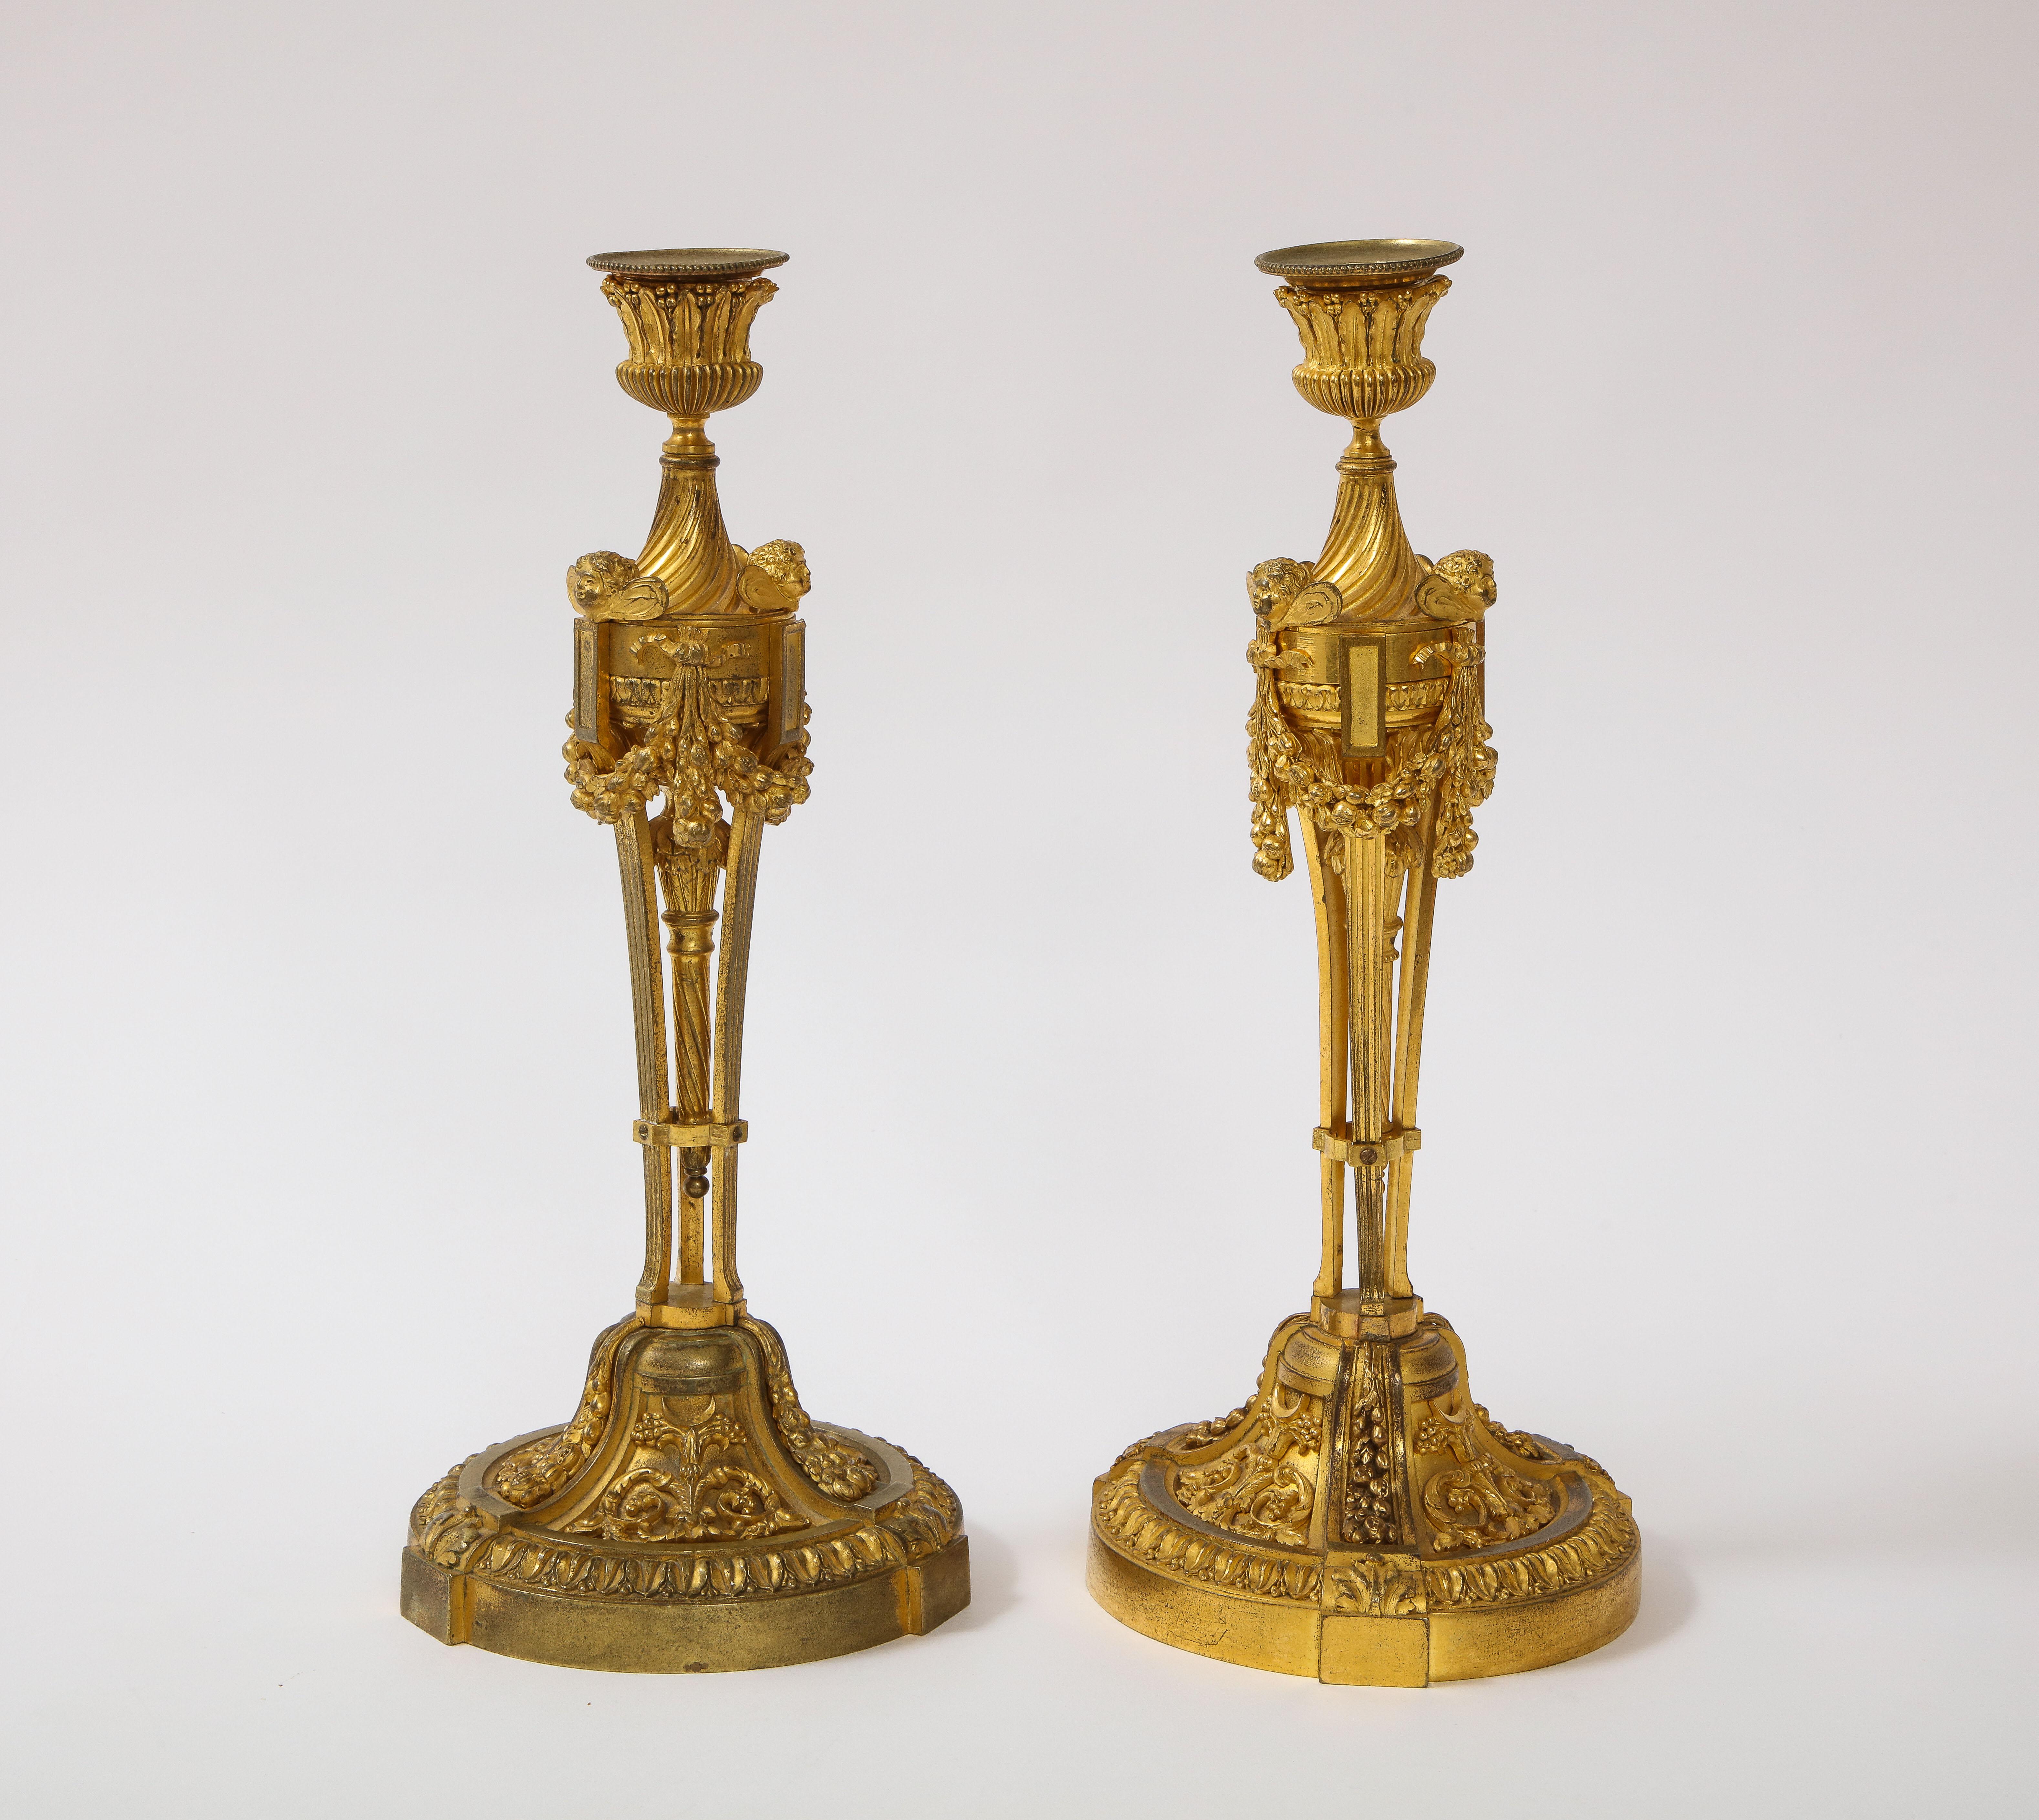 Pair of French Louid xvi Ormolu Candlesticks with Putti Masks and Garlands For Sale 1